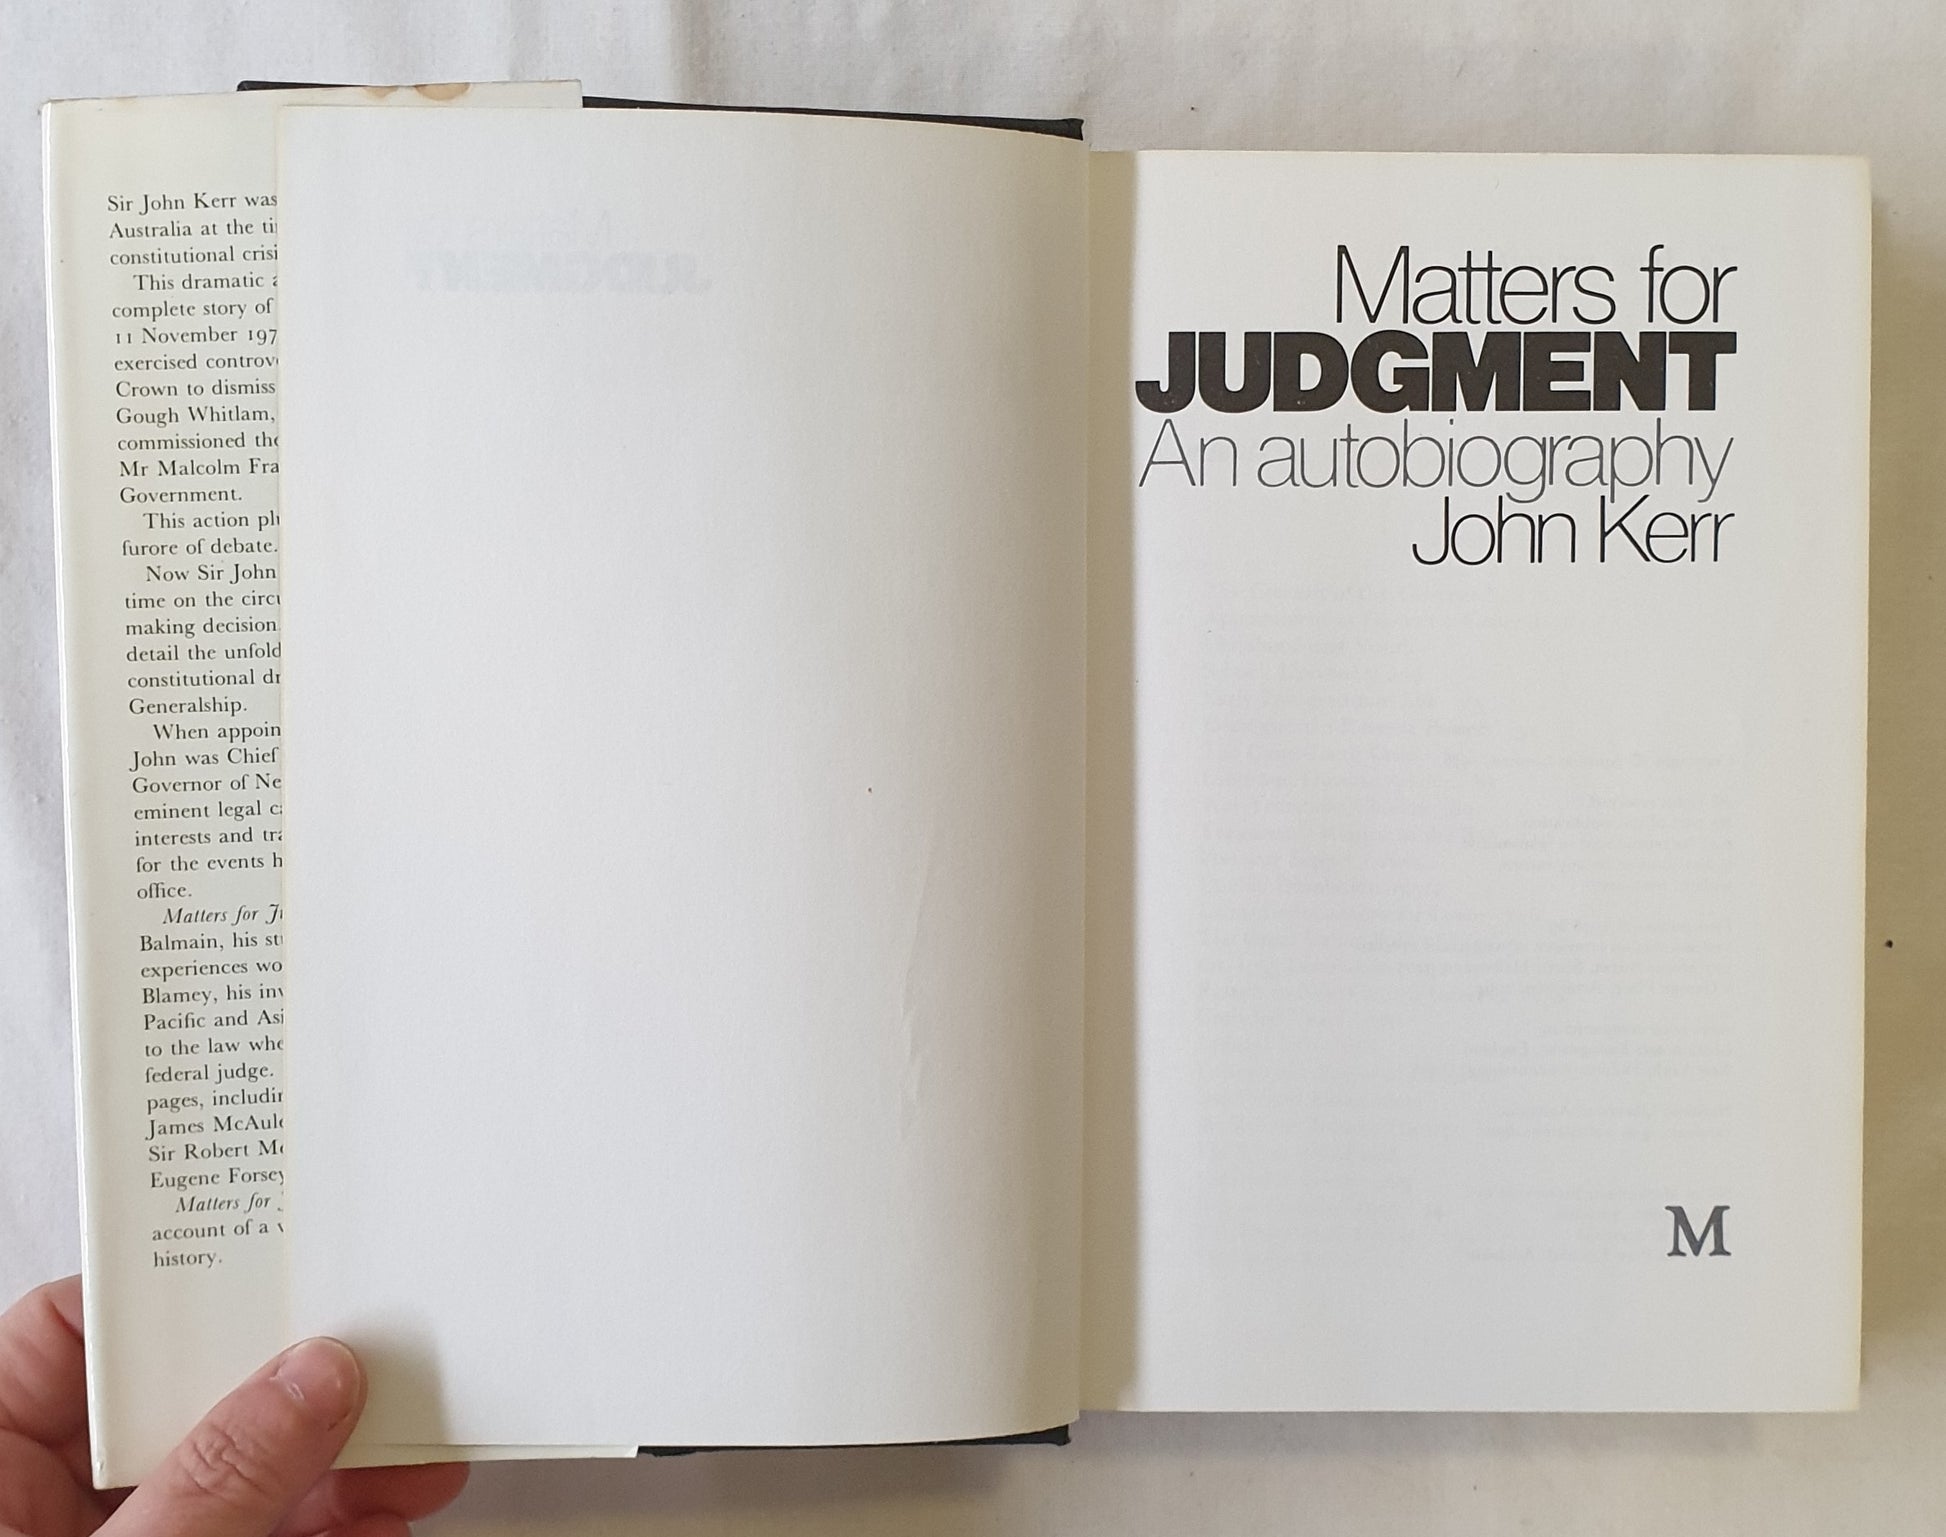 Matters for Judgment An Autobiography by John Kerr